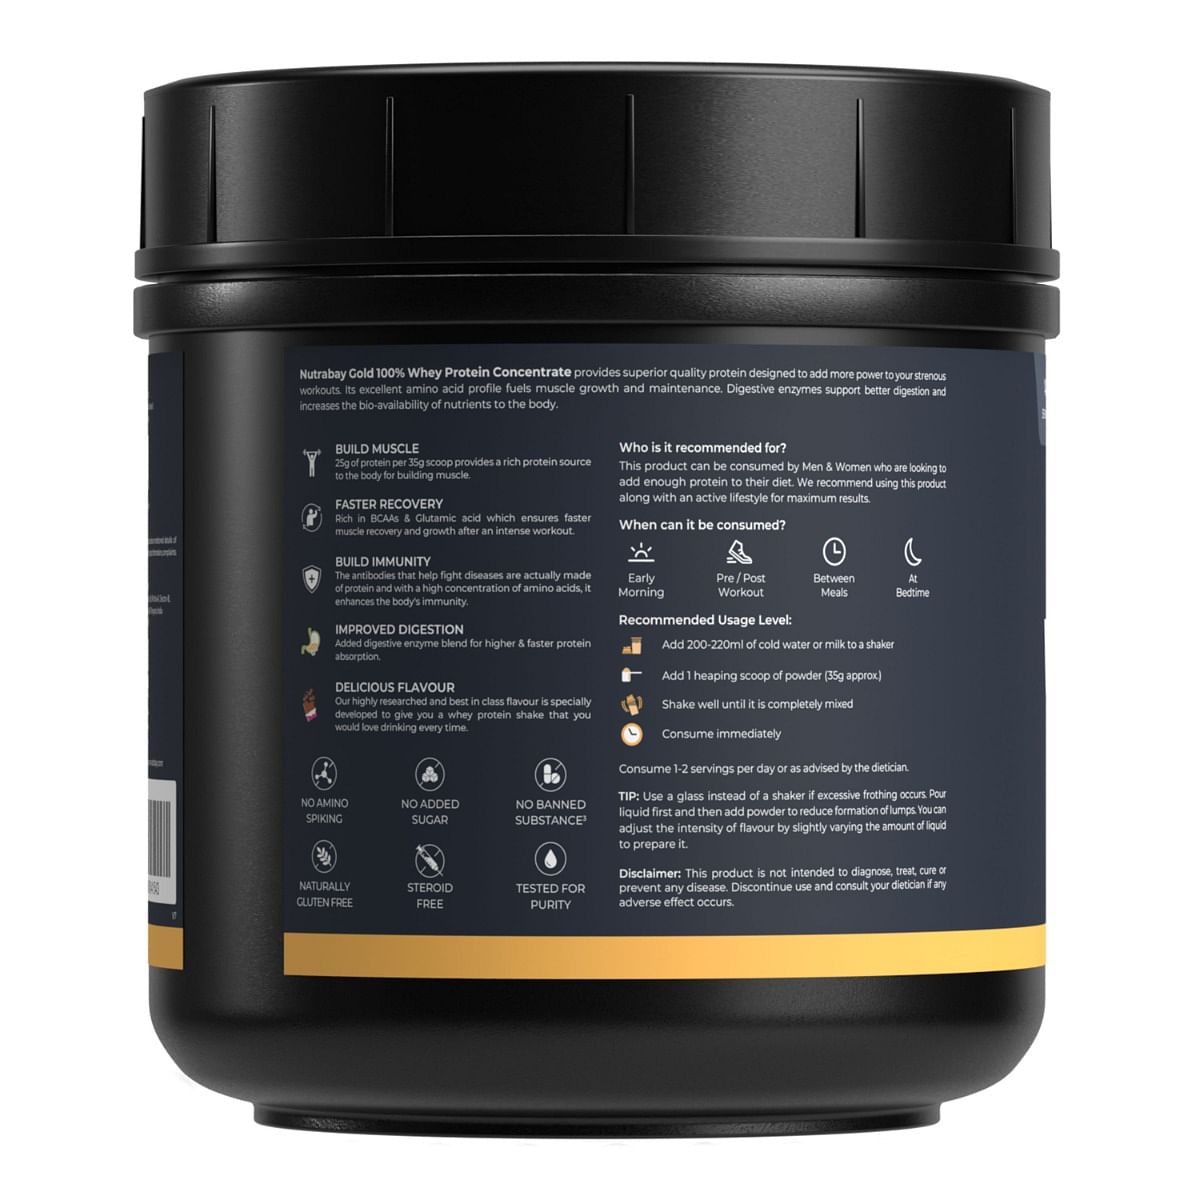 NUTRABAY Gold 100 Whey Protein 500g, 15 Servings: 25g Protein, 5.3g BCAA, 3.9g Glutamic Acid. Muscle Growth & Recovery Supplement for Men & Women.